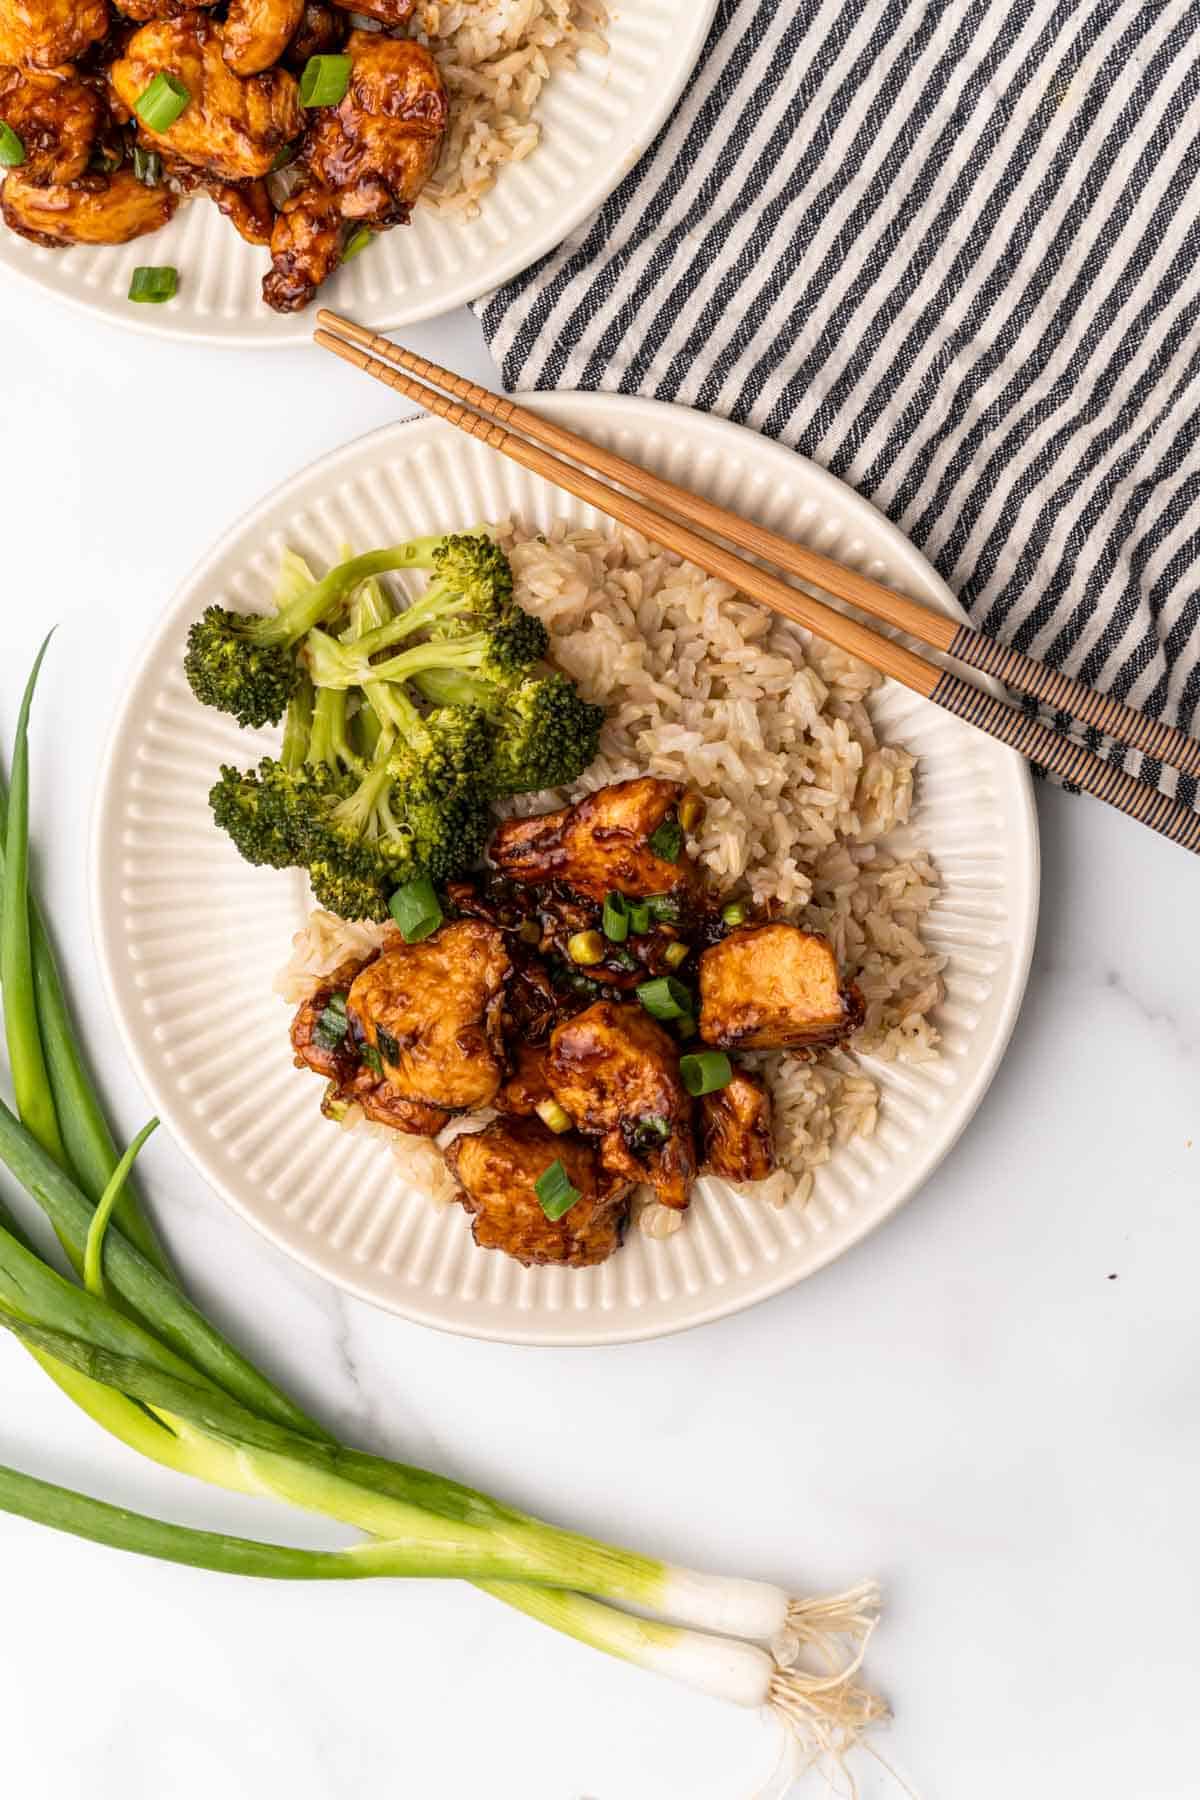 Plate of Low-Carb General Tso's Chicken seen from above